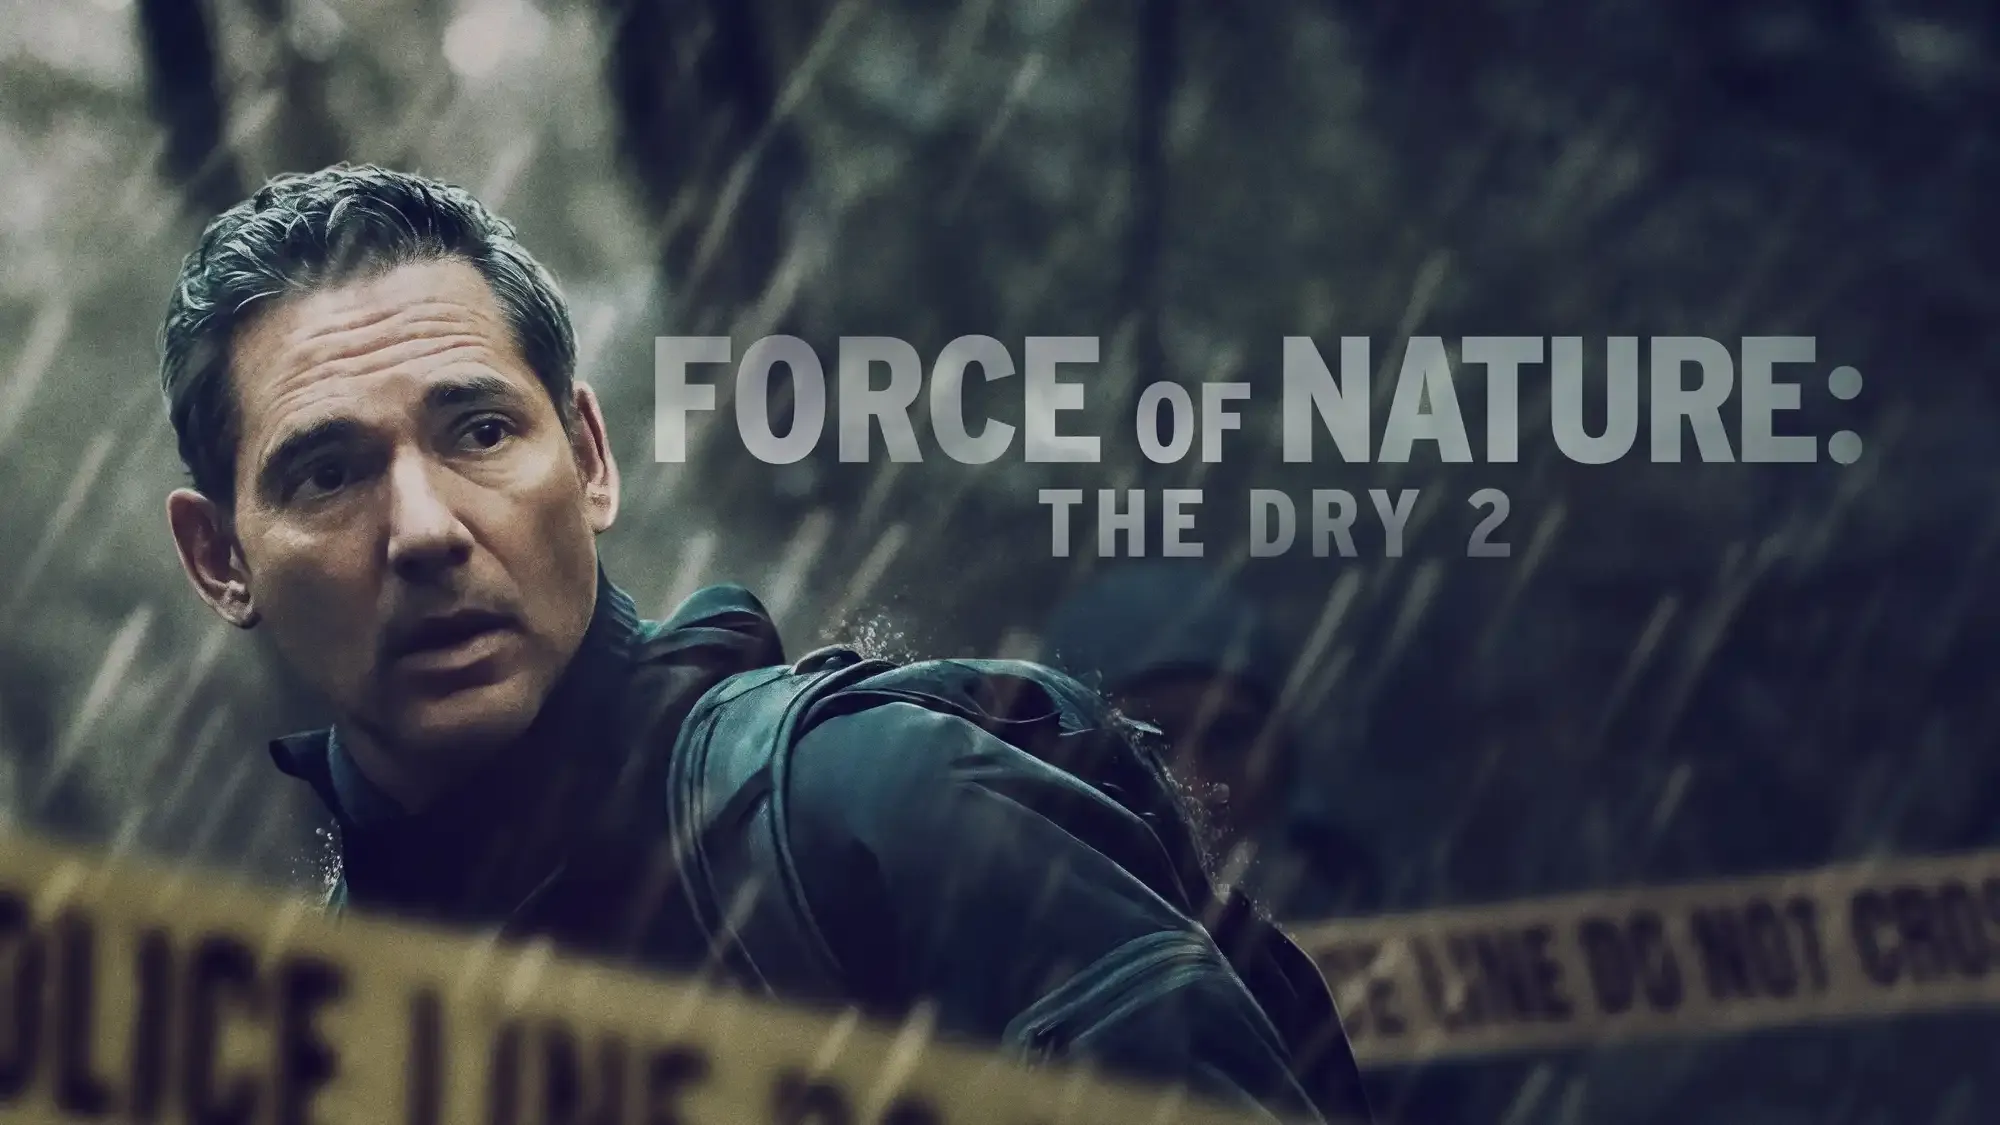 Force of Nature: The Dry 2 movie review